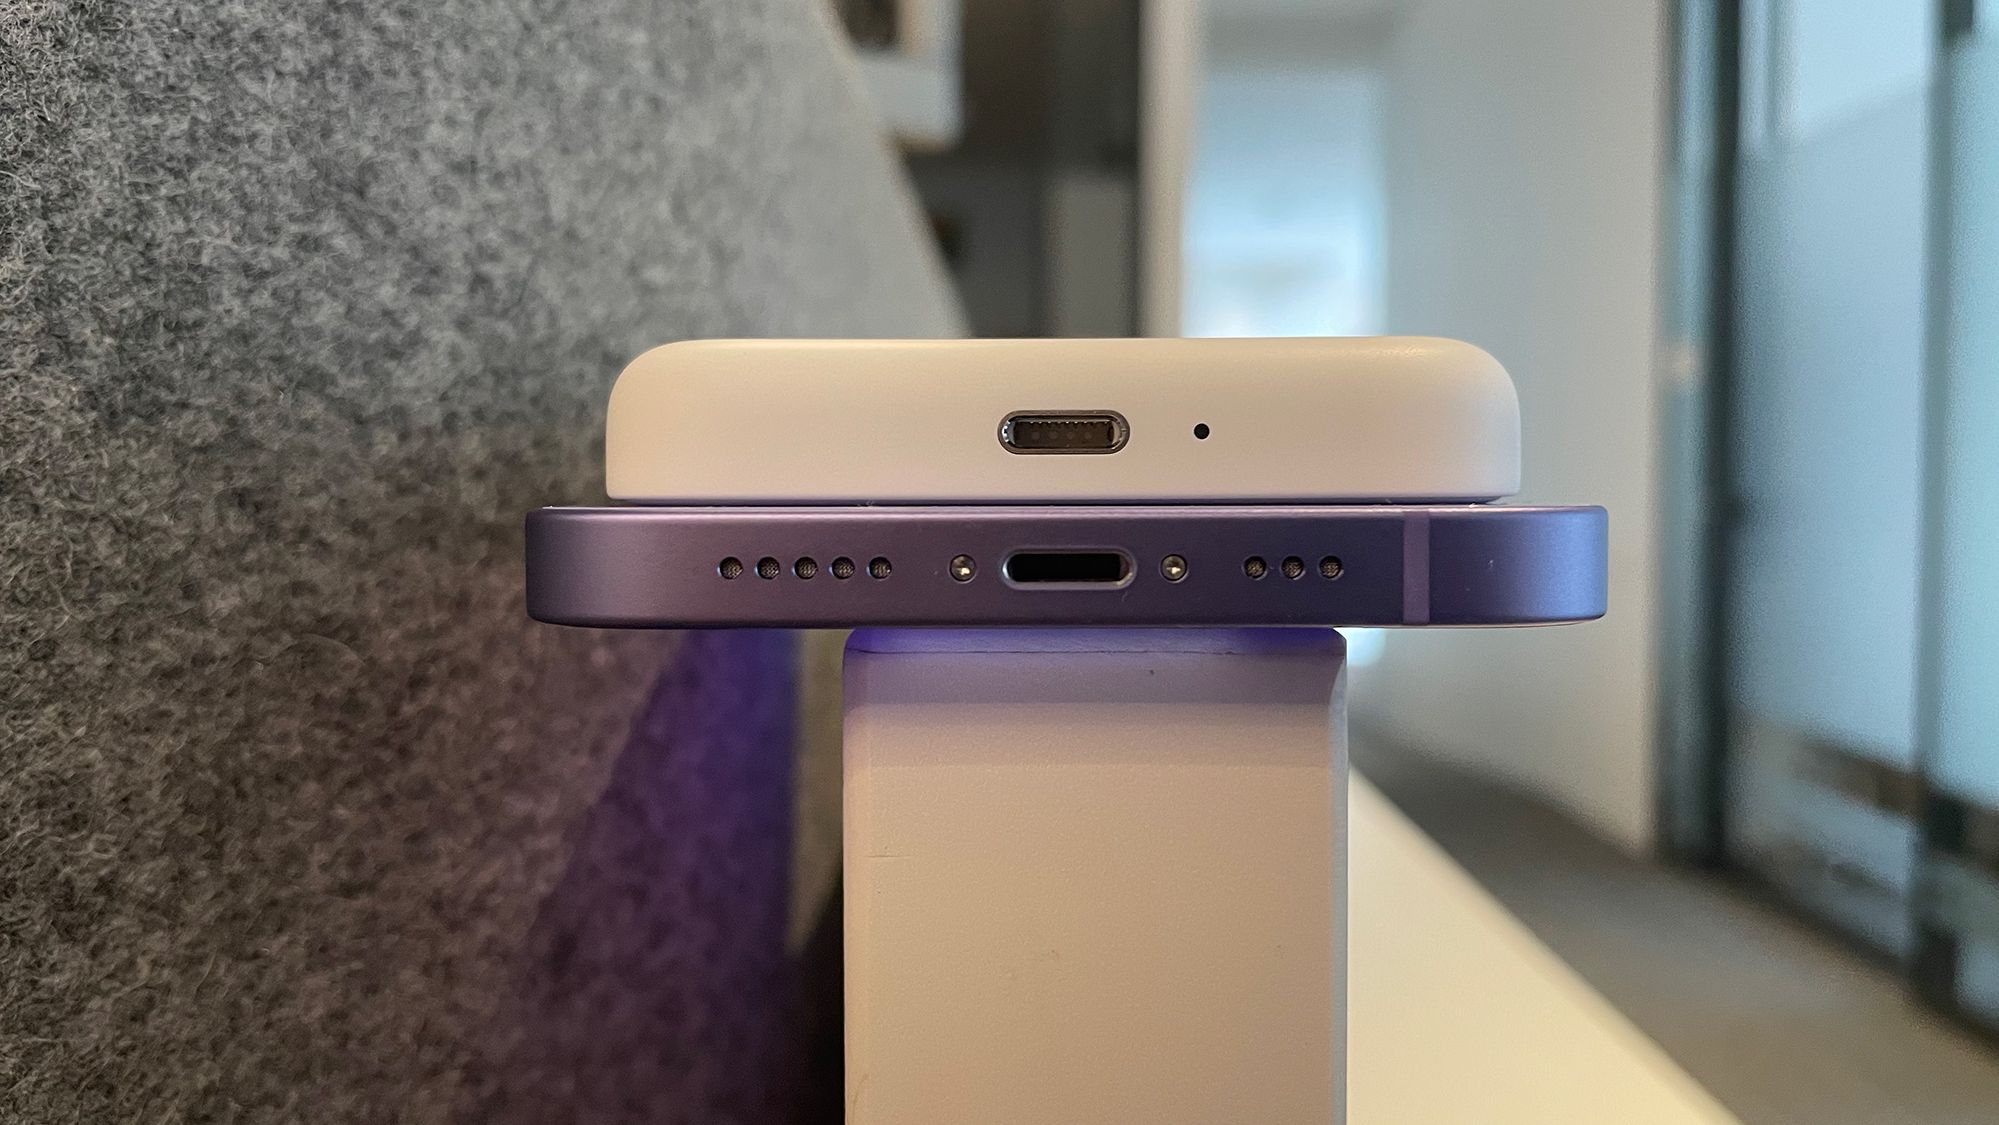 Apple's new MagSafe battery pack just made power banks cool again